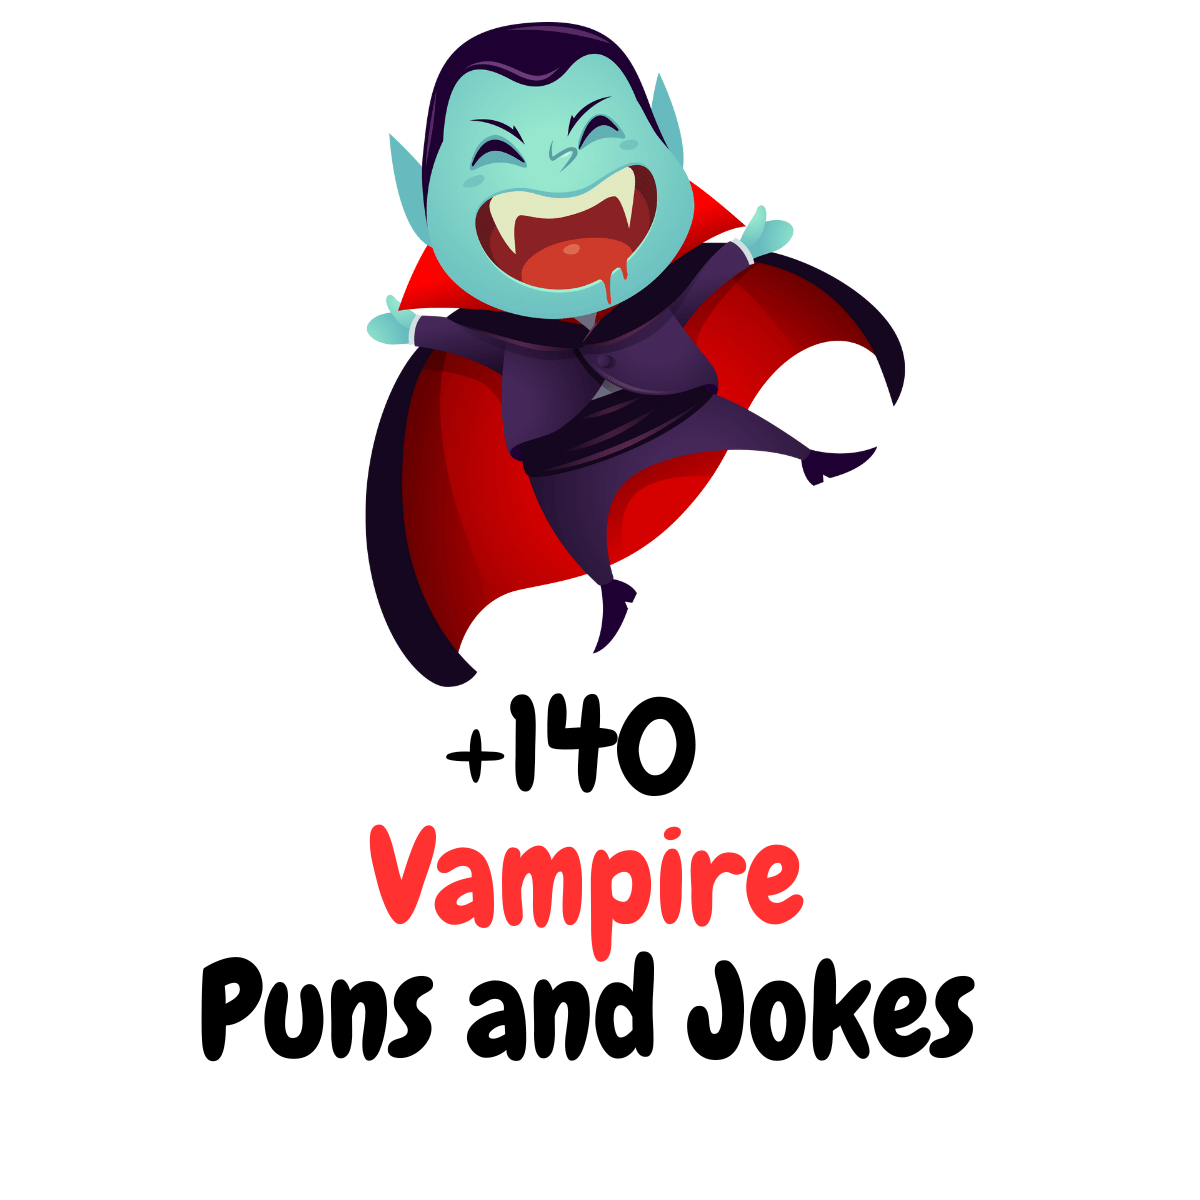 +140 Funny Vampire Puns and Jokes: A Playful Compilation